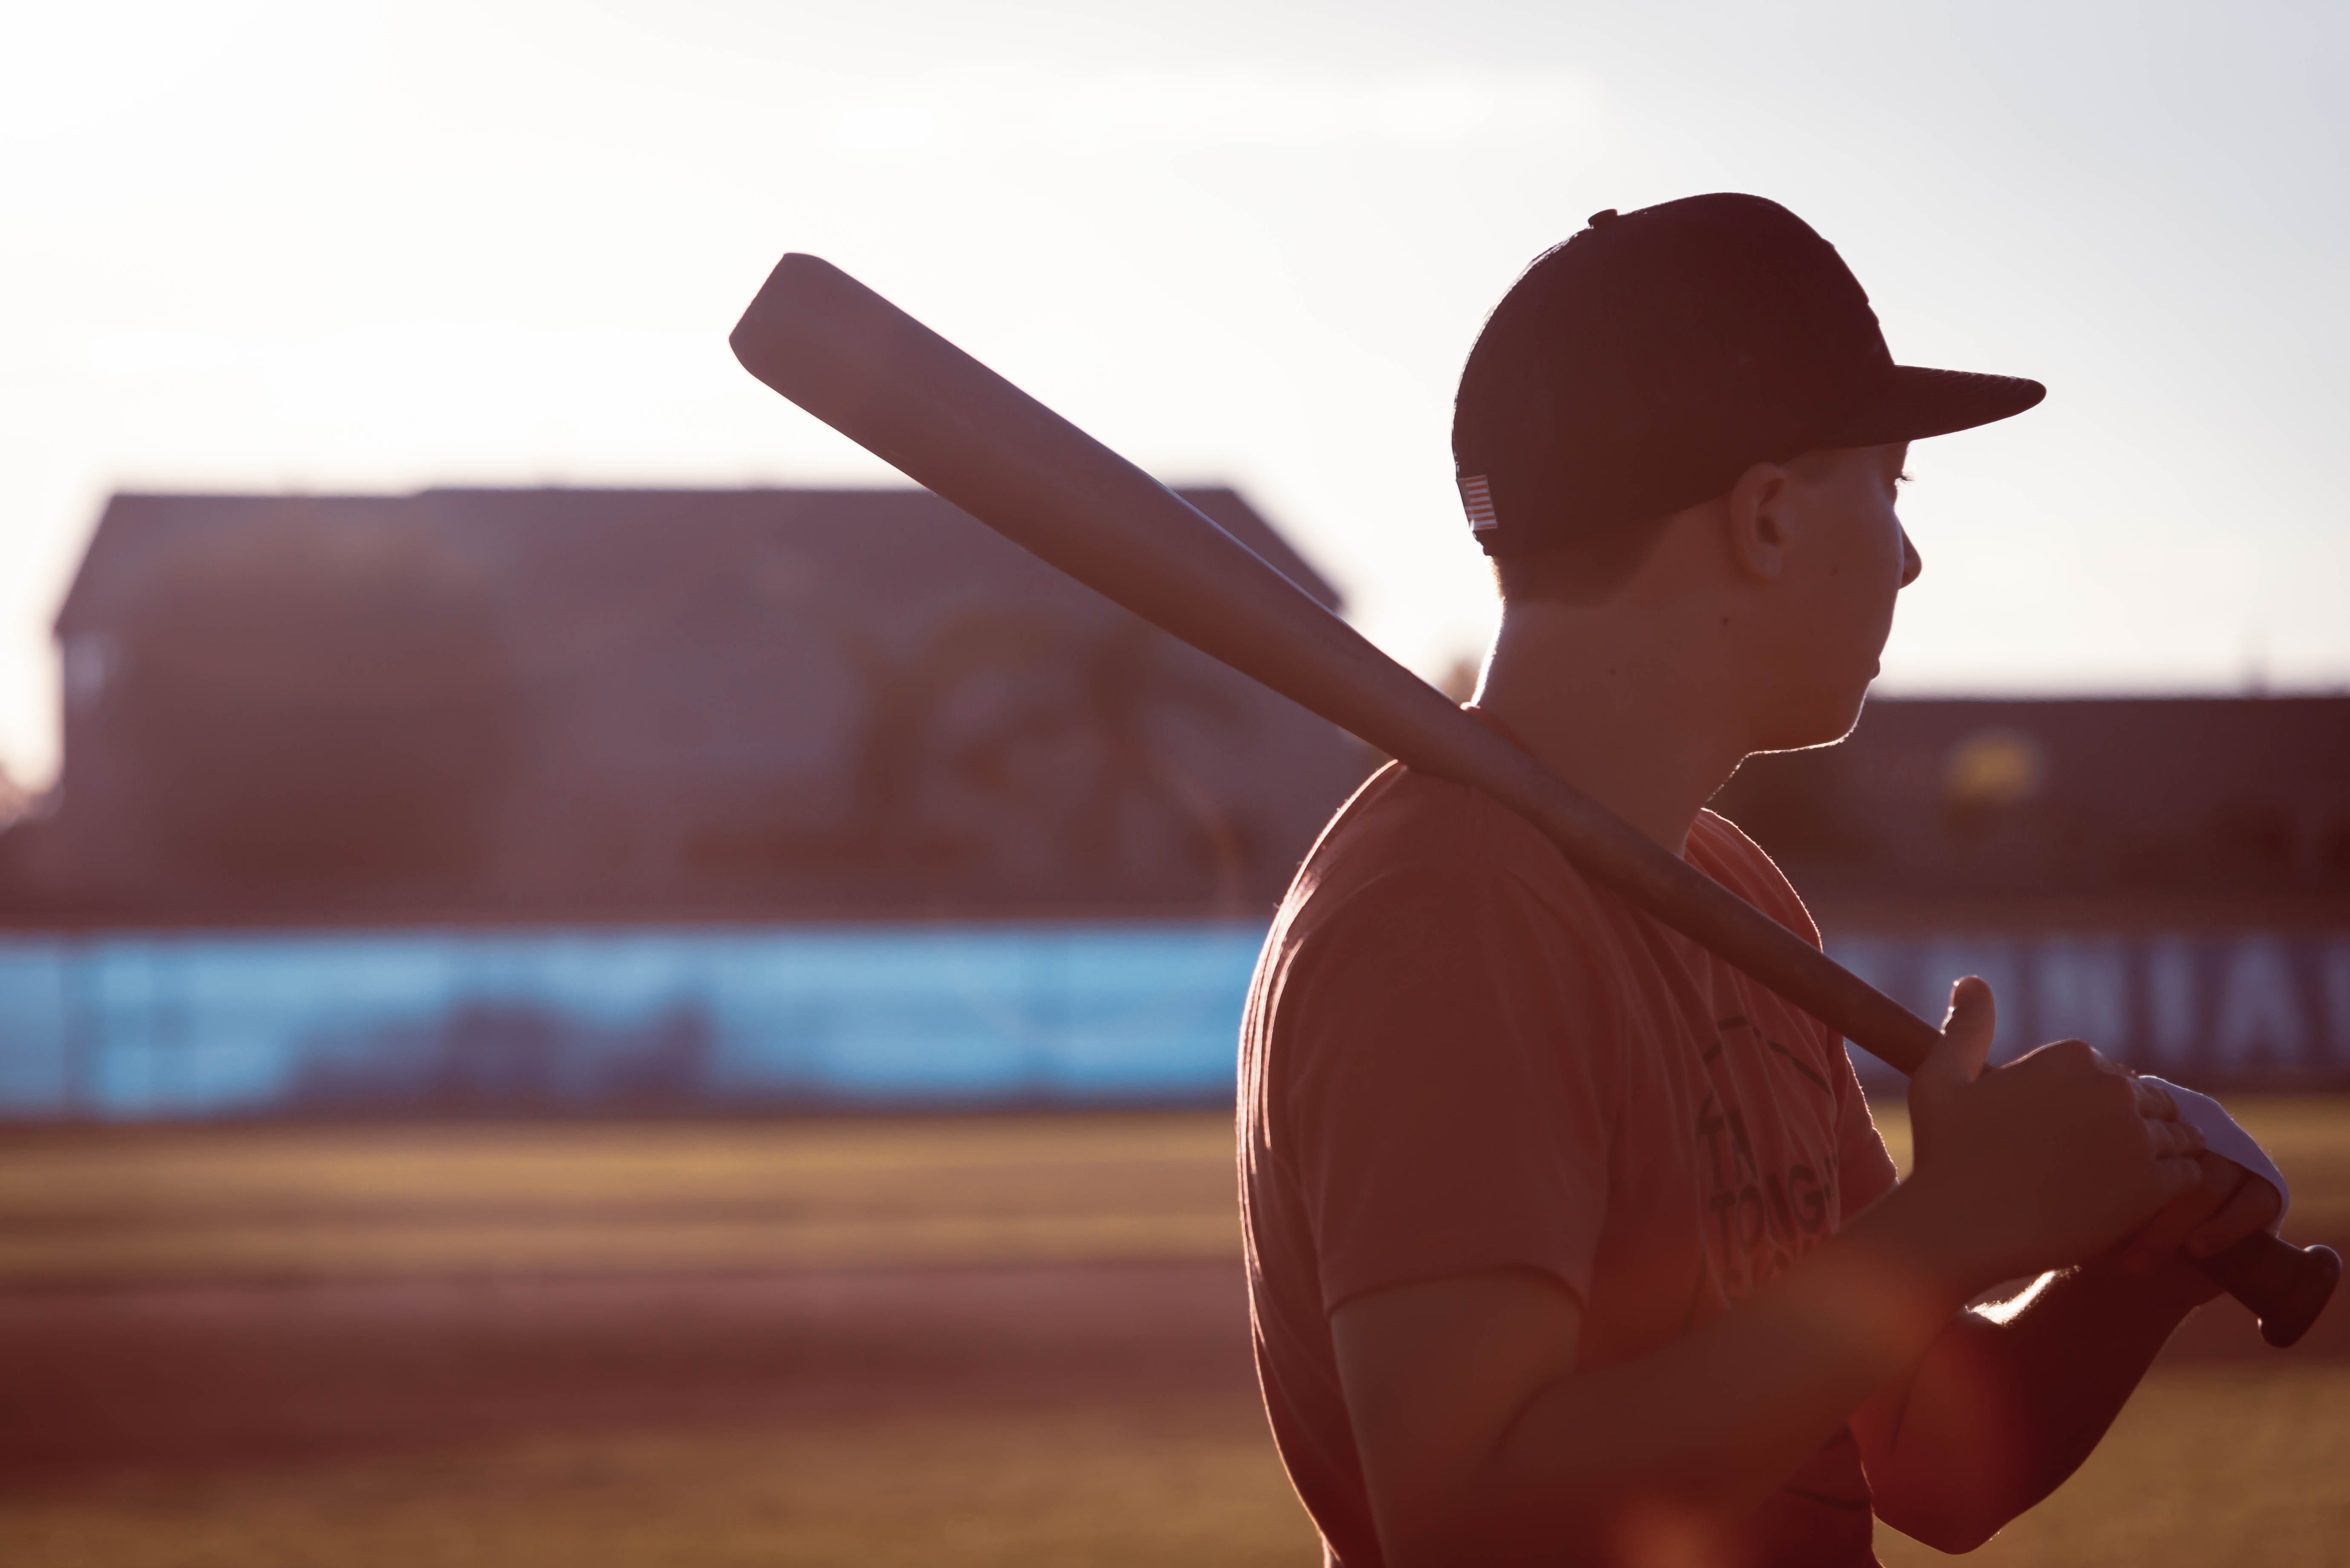 Patrick saw the father and son playing baseball which made him sad because he used to play the sport with his father. | Source: Tim Eiden/Pexels